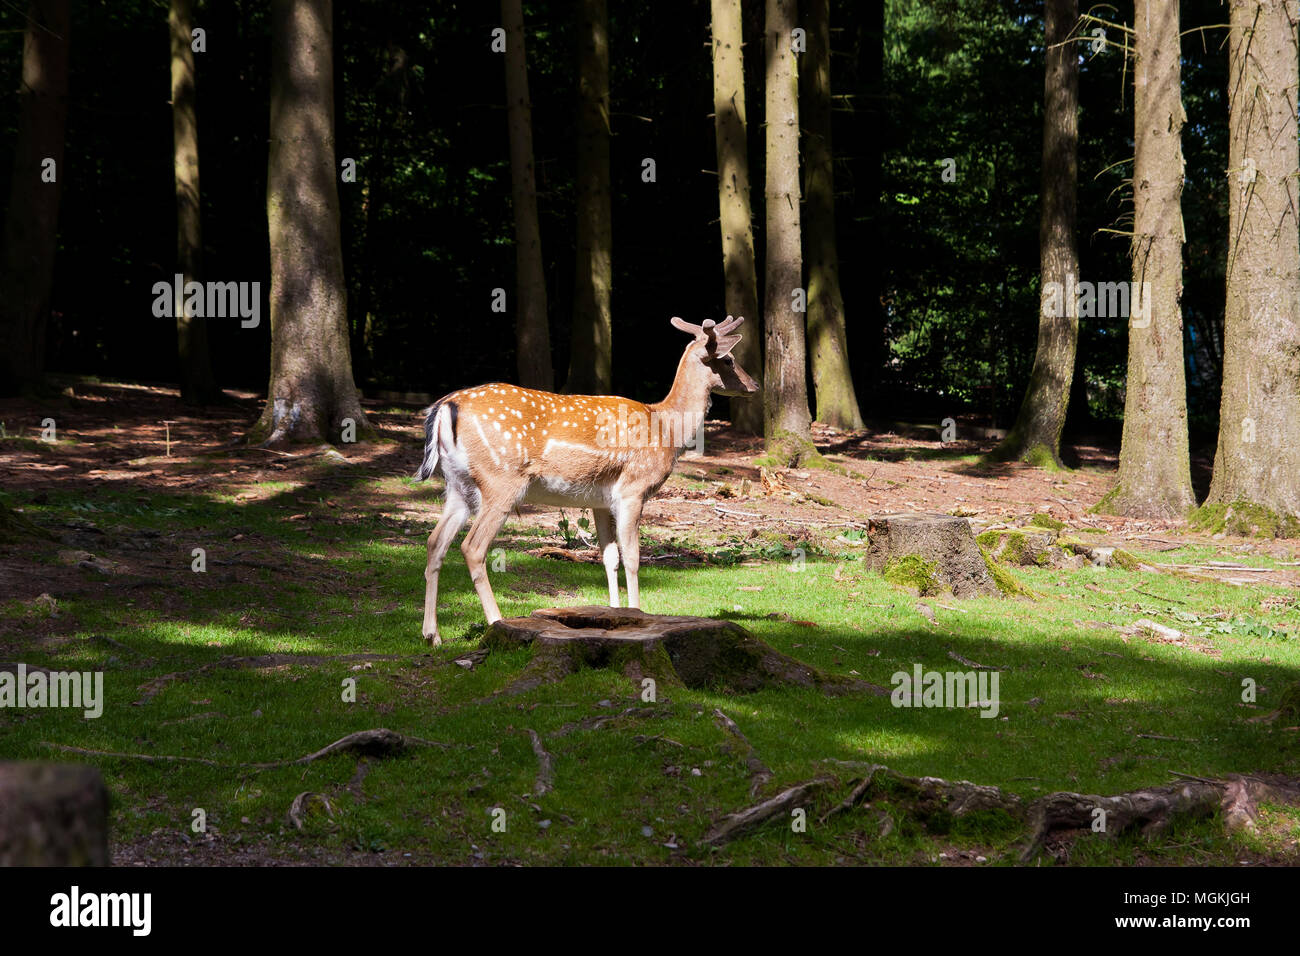 Fallow deer in a forest clearing lightened by the sun Stock Photo